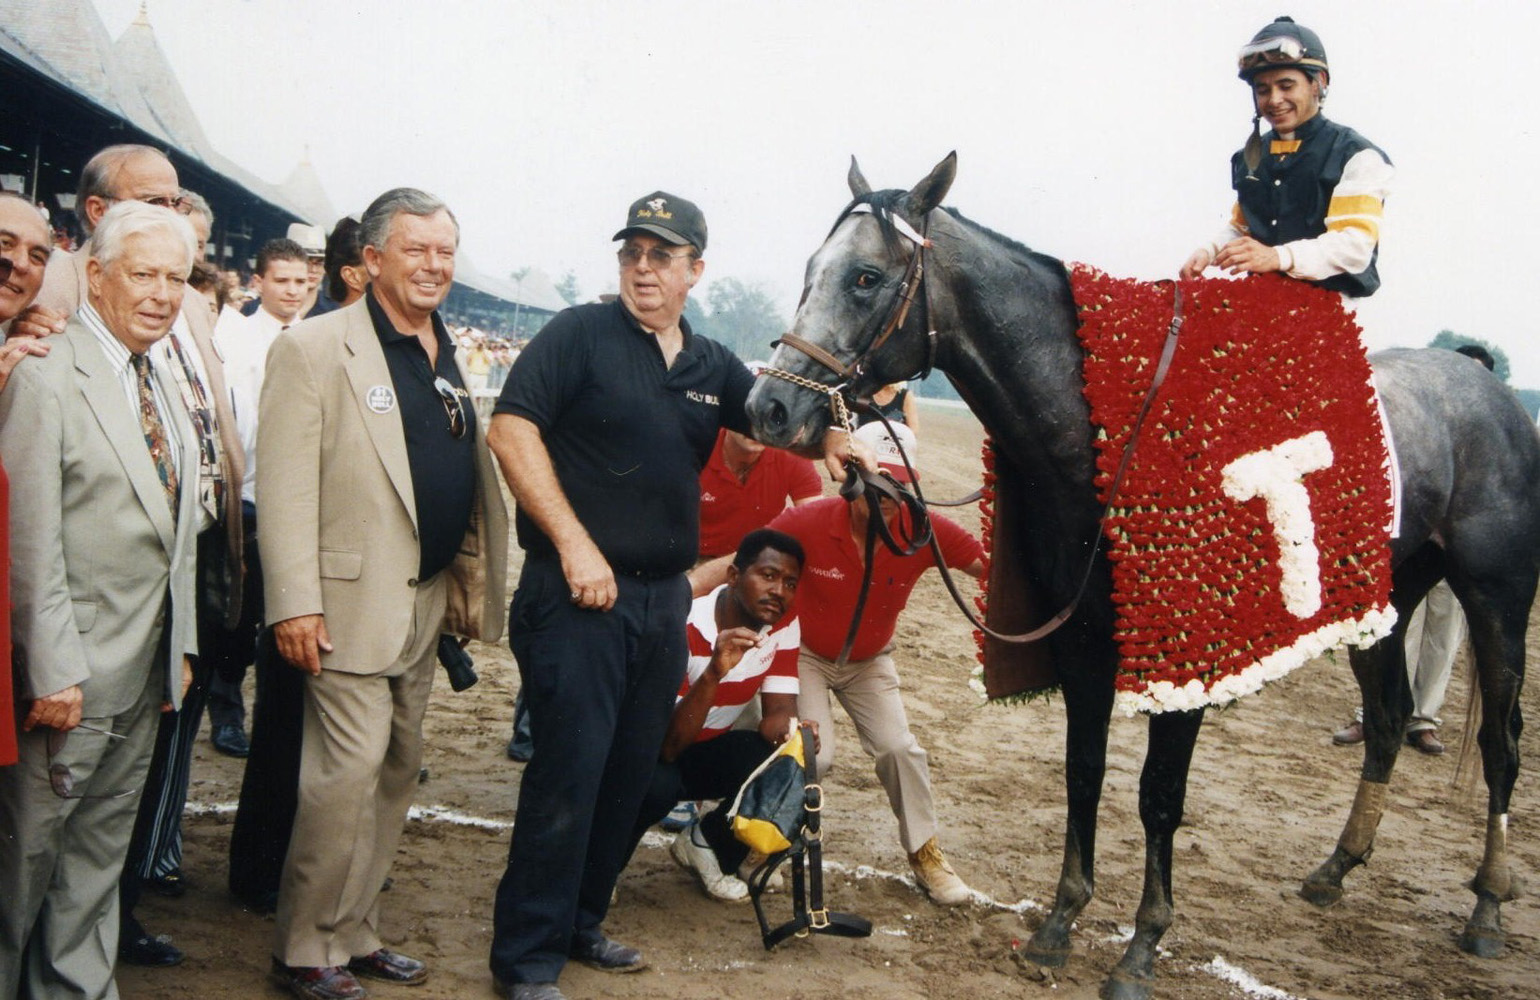 Jimmy Croll joins Holy Bull (Mike Smith up) in the winner's circle for the 1994 Travers Stakes (Barbara D. Livingston/Museum Collection)